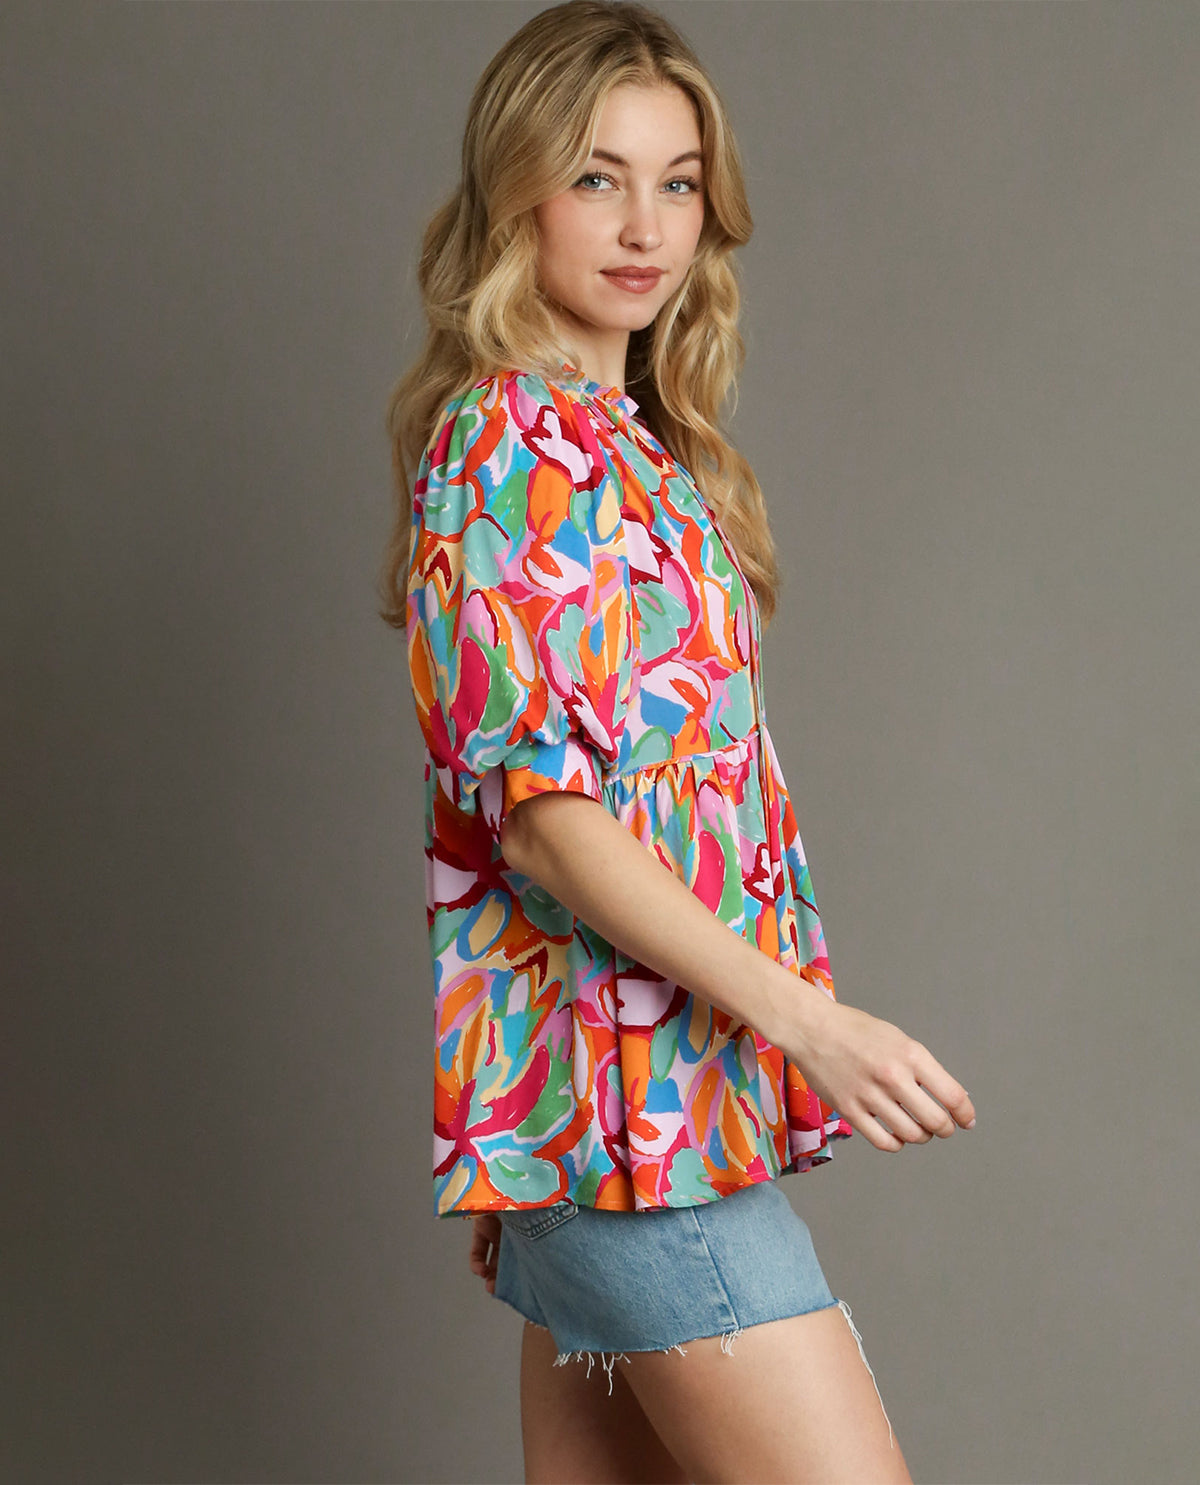 Abstract Print Baby Doll Top